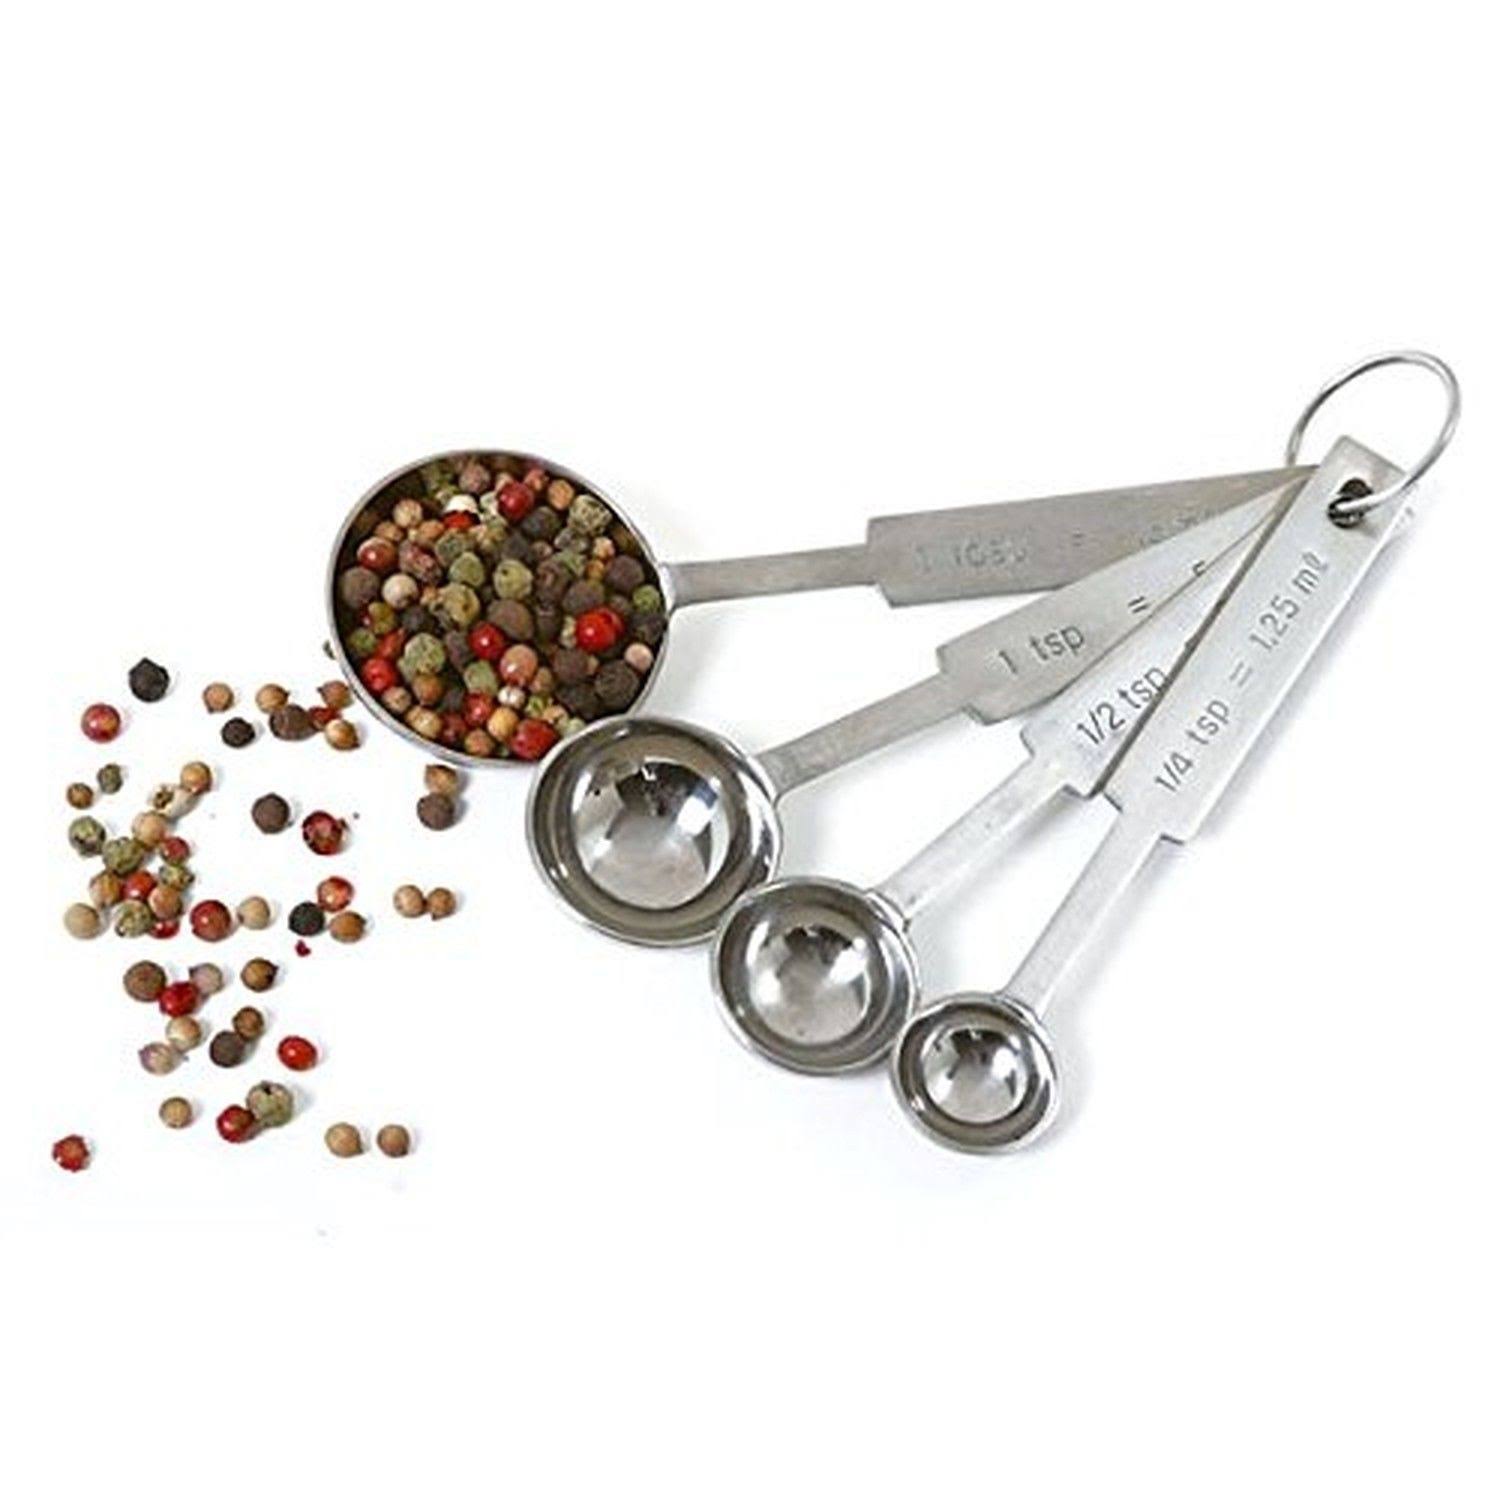 Norpro Stainless Steel Measuring Spoons - 4pcs